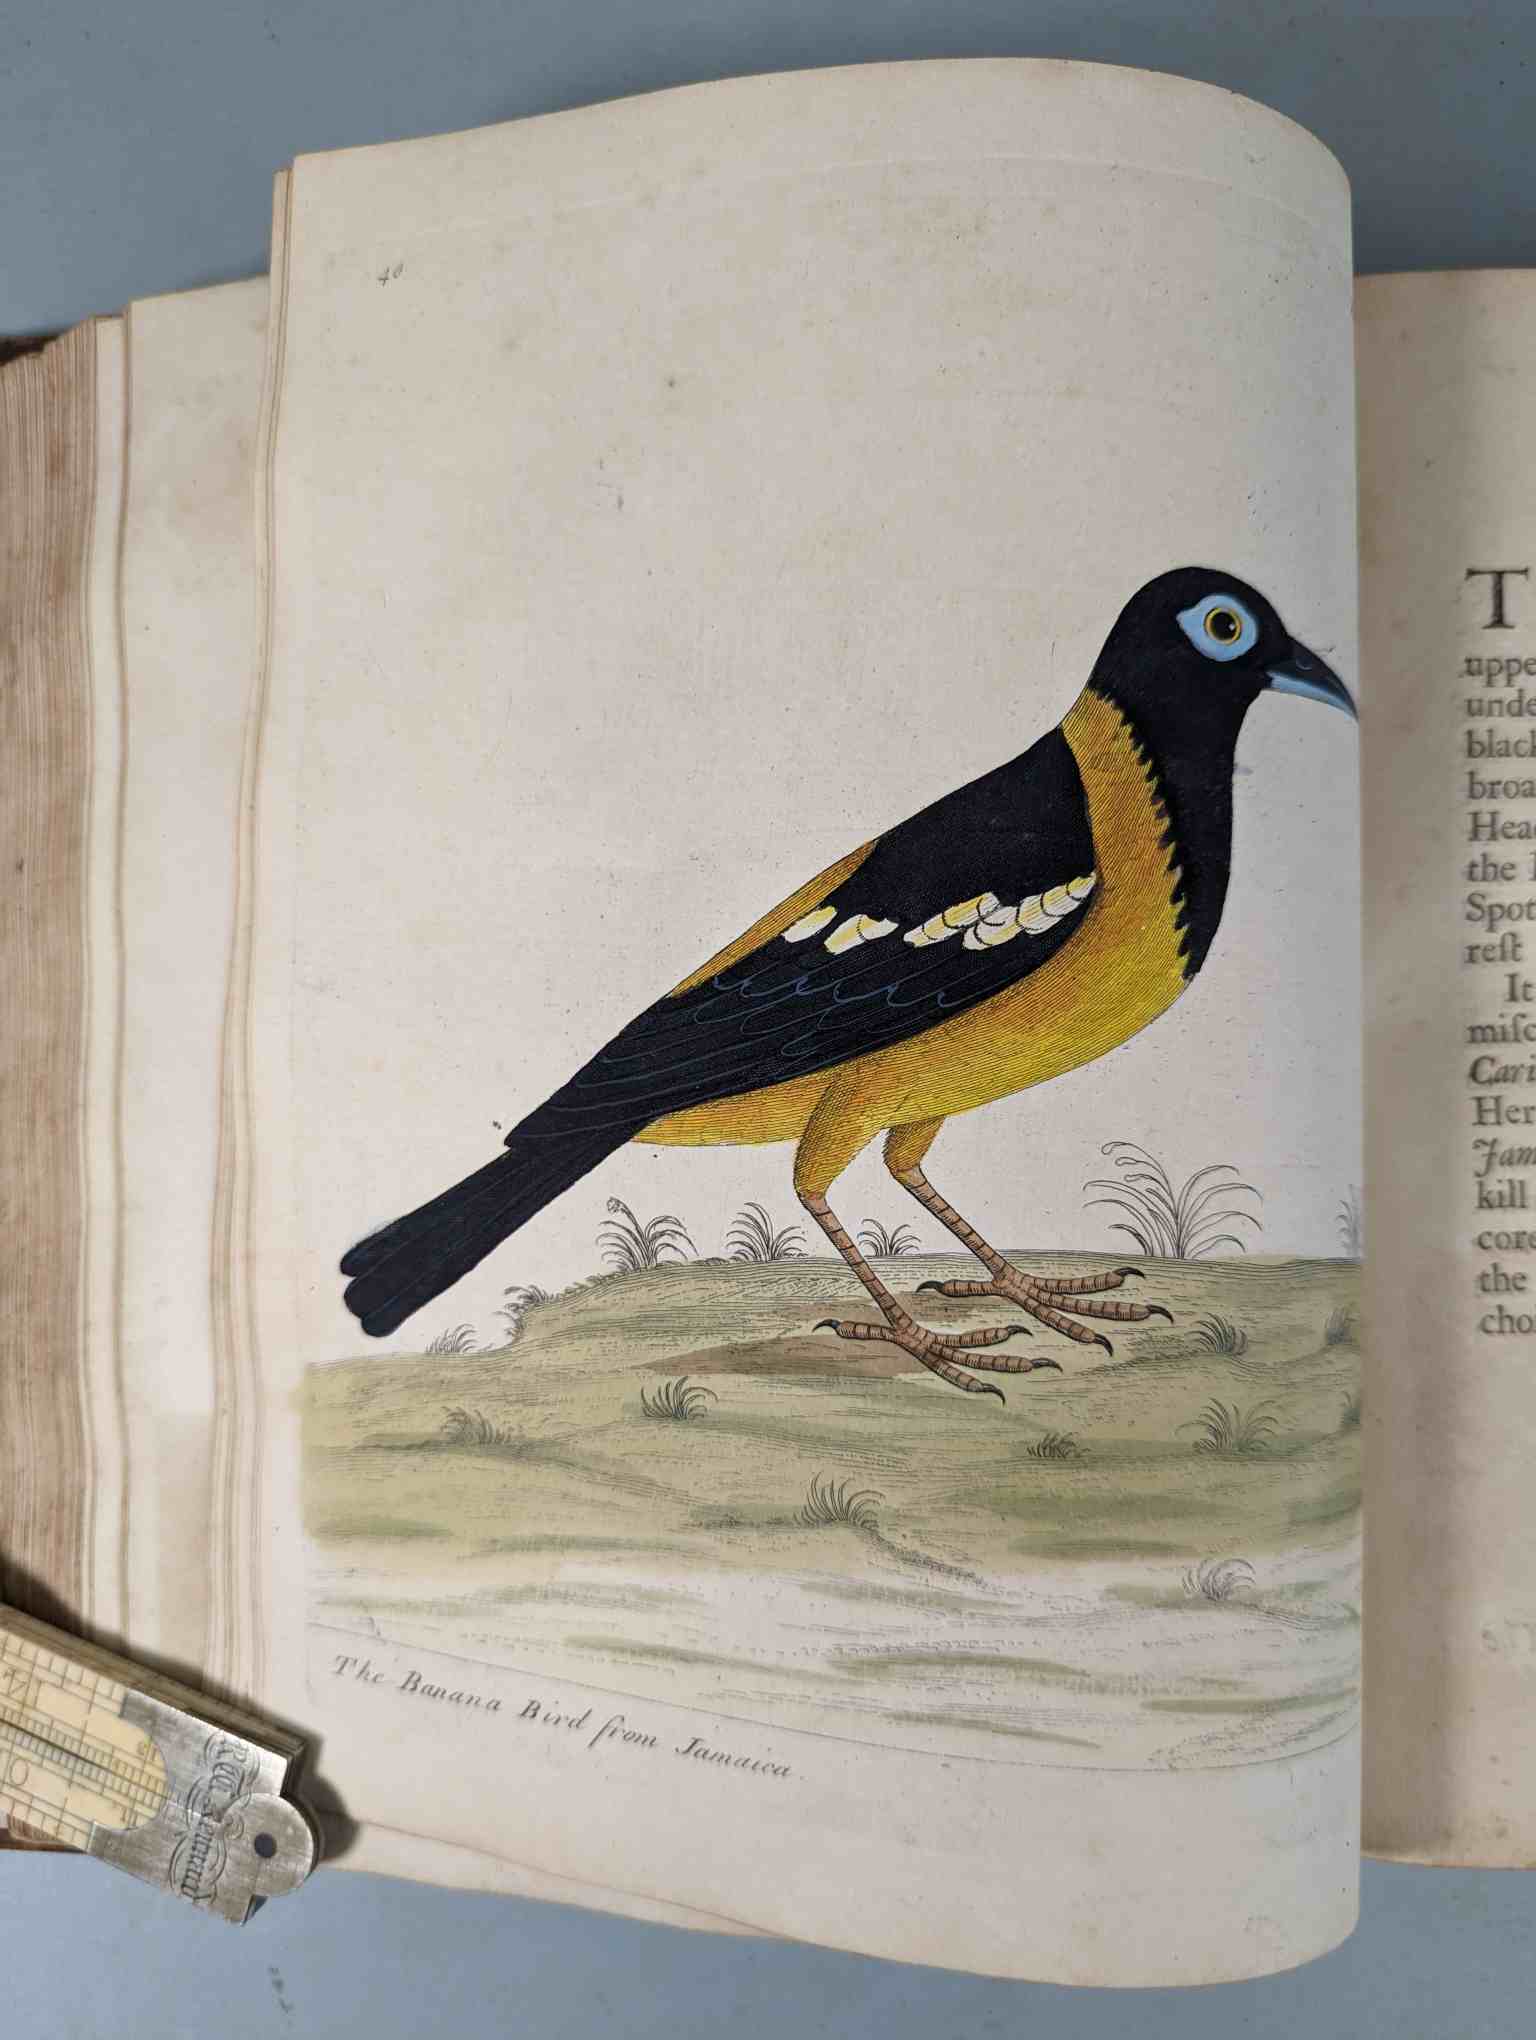 ALBIN, Eleazar. A Natural History of Birds, to which are added, Notes and Observations by W. - Image 144 of 208